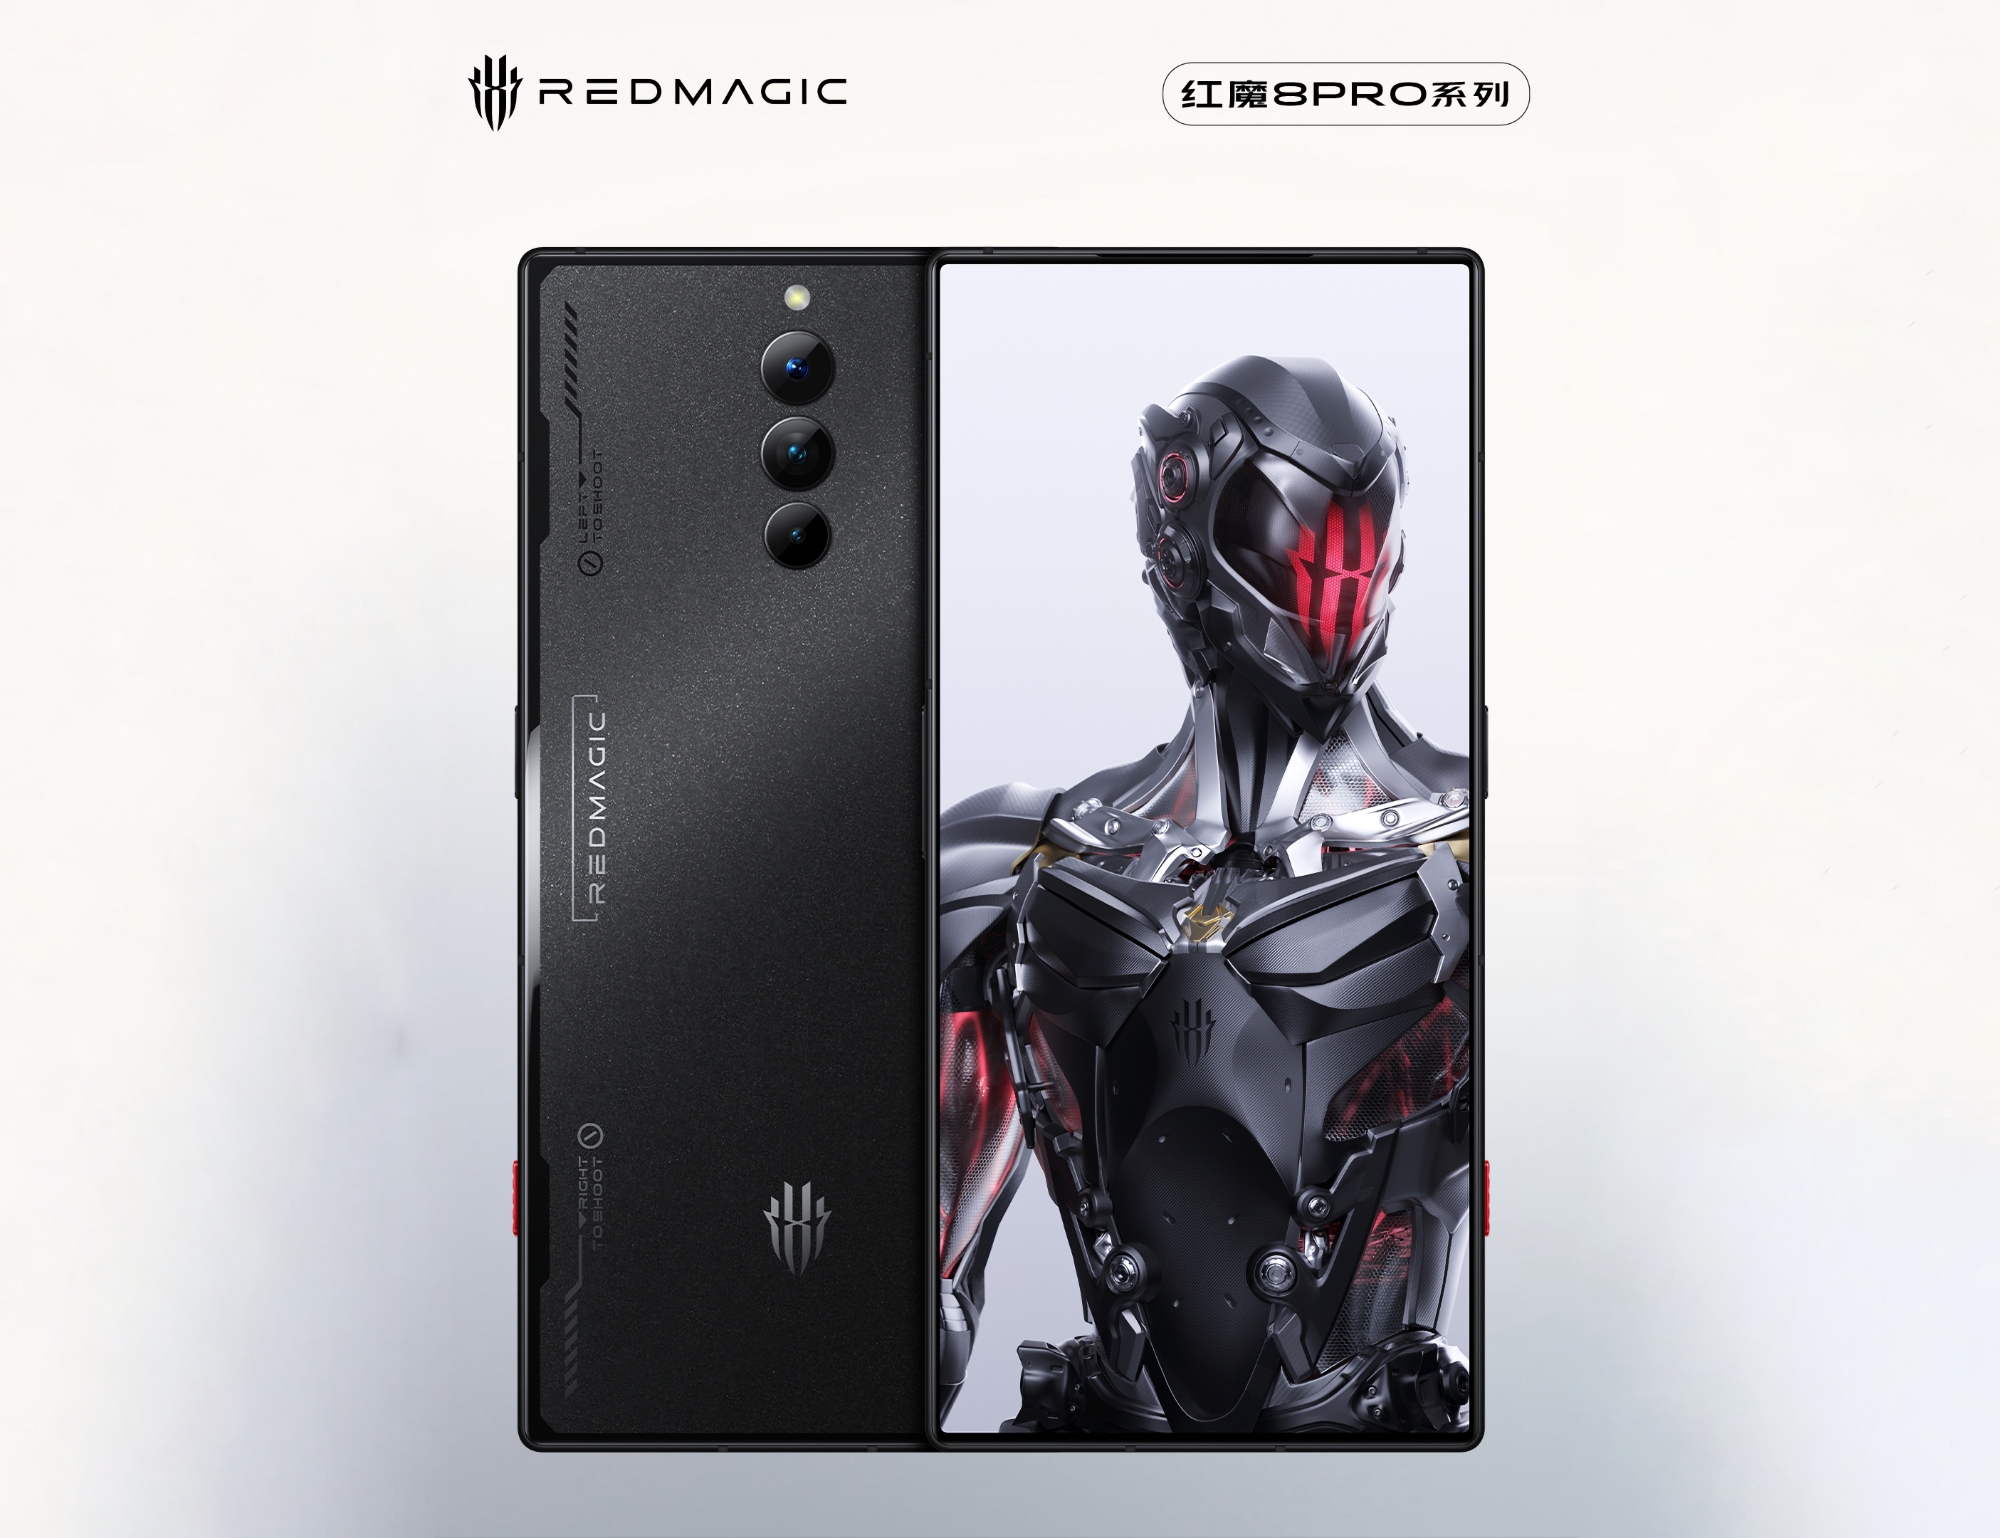 nubia will unveil Red Magic 8 and Red Magic 8 Pro gaming smartphones on December 26